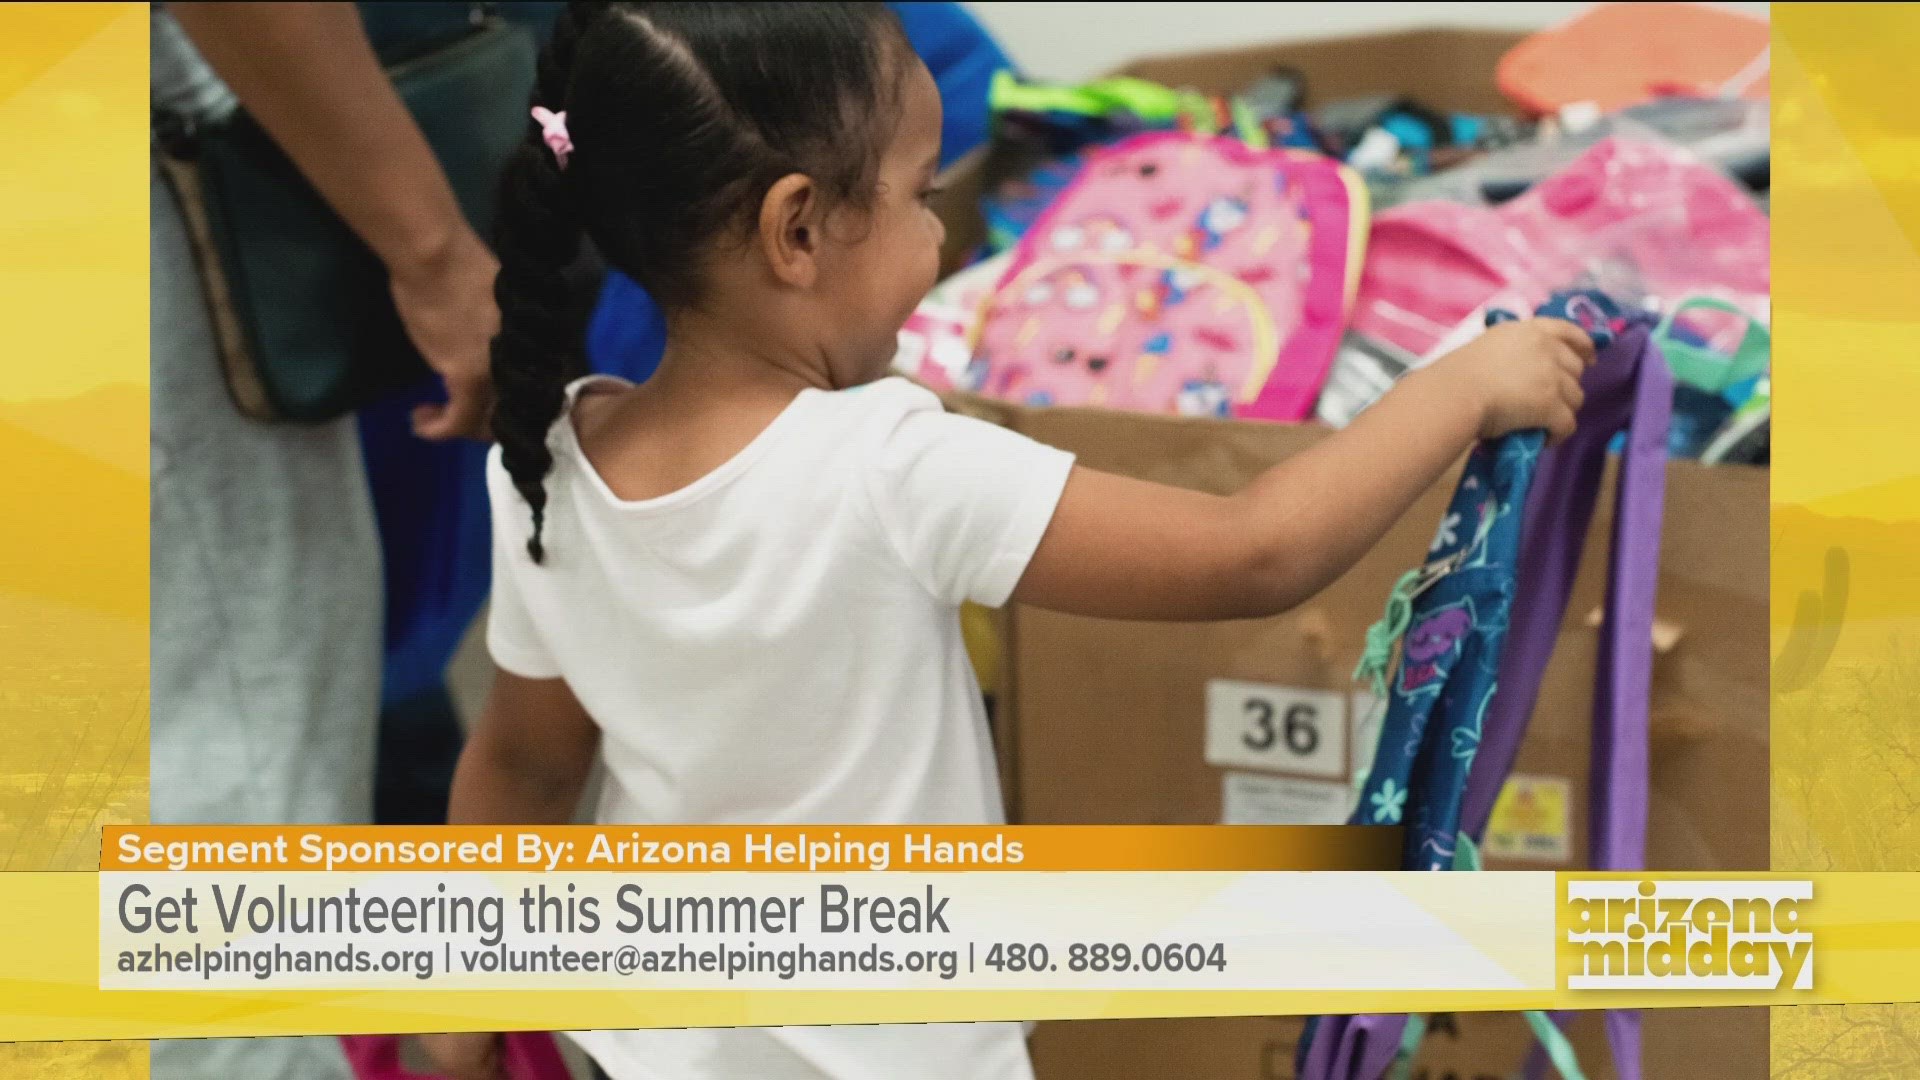 Bethany Eggleston of Arizona Helping Hands shares how you can give back to the community by volunteering at their warehouse, collecting school supplies and donating.